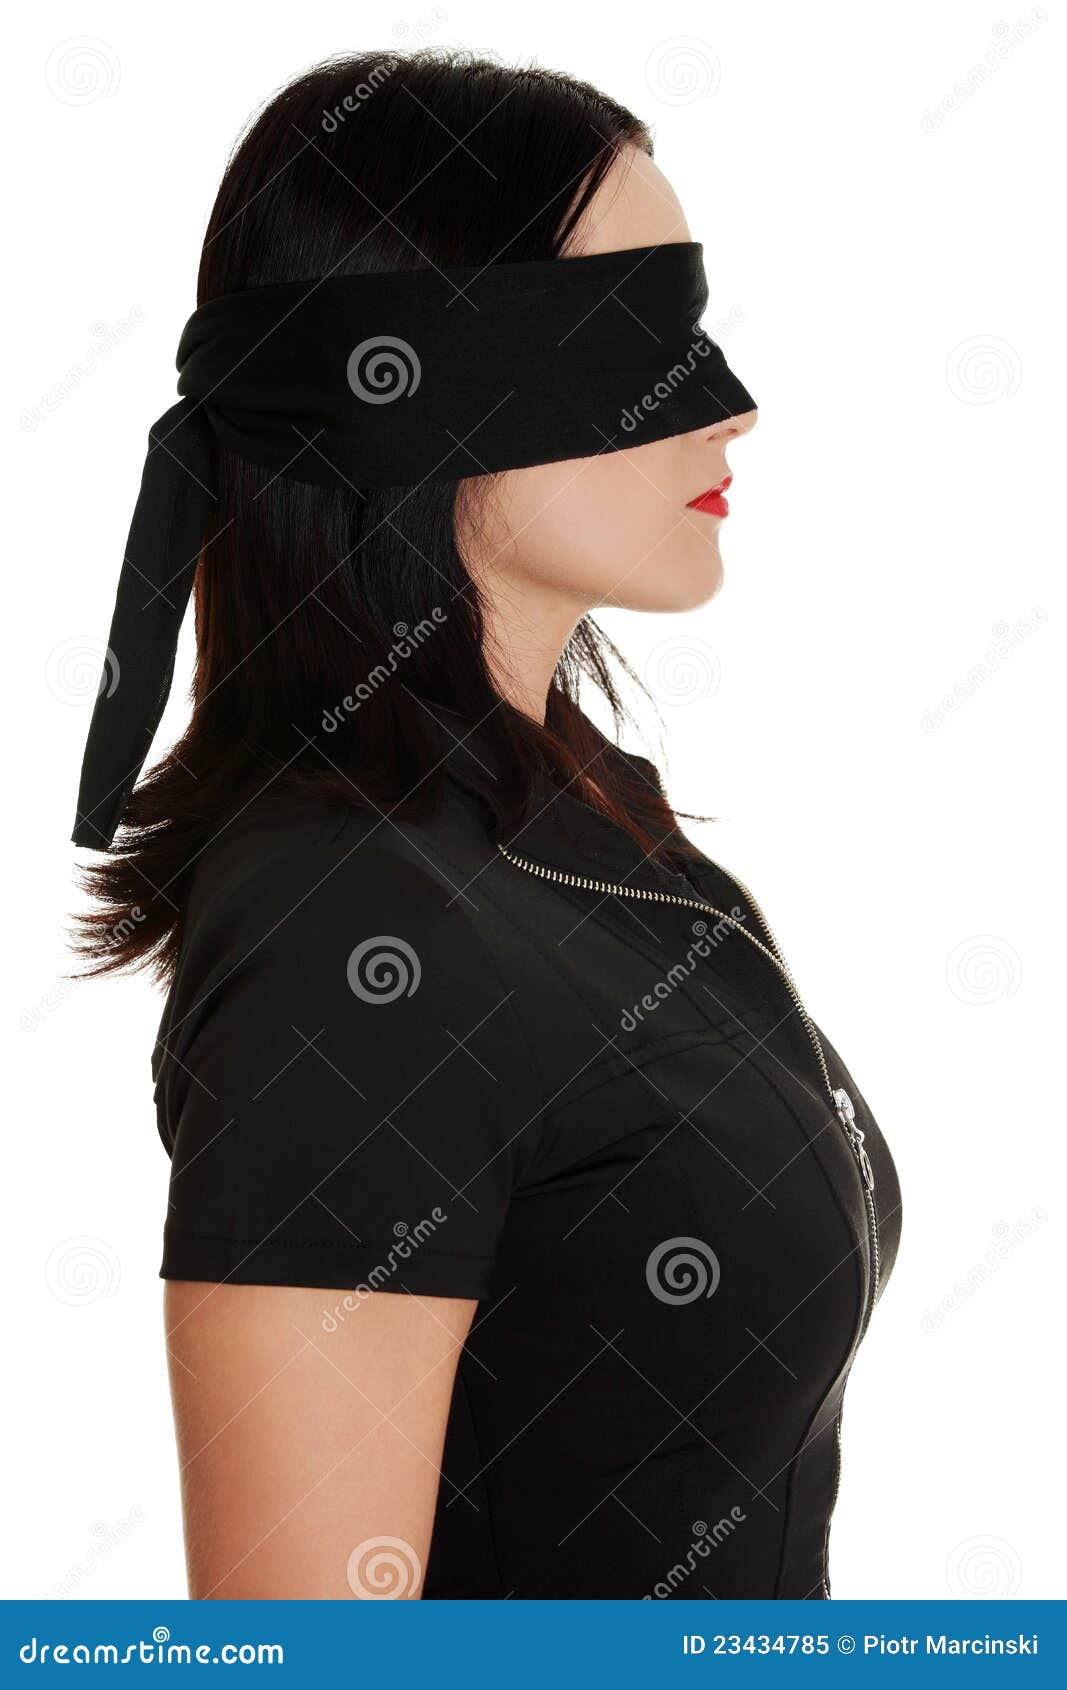 Black woman blindfolded: hostage concept, Stock Video